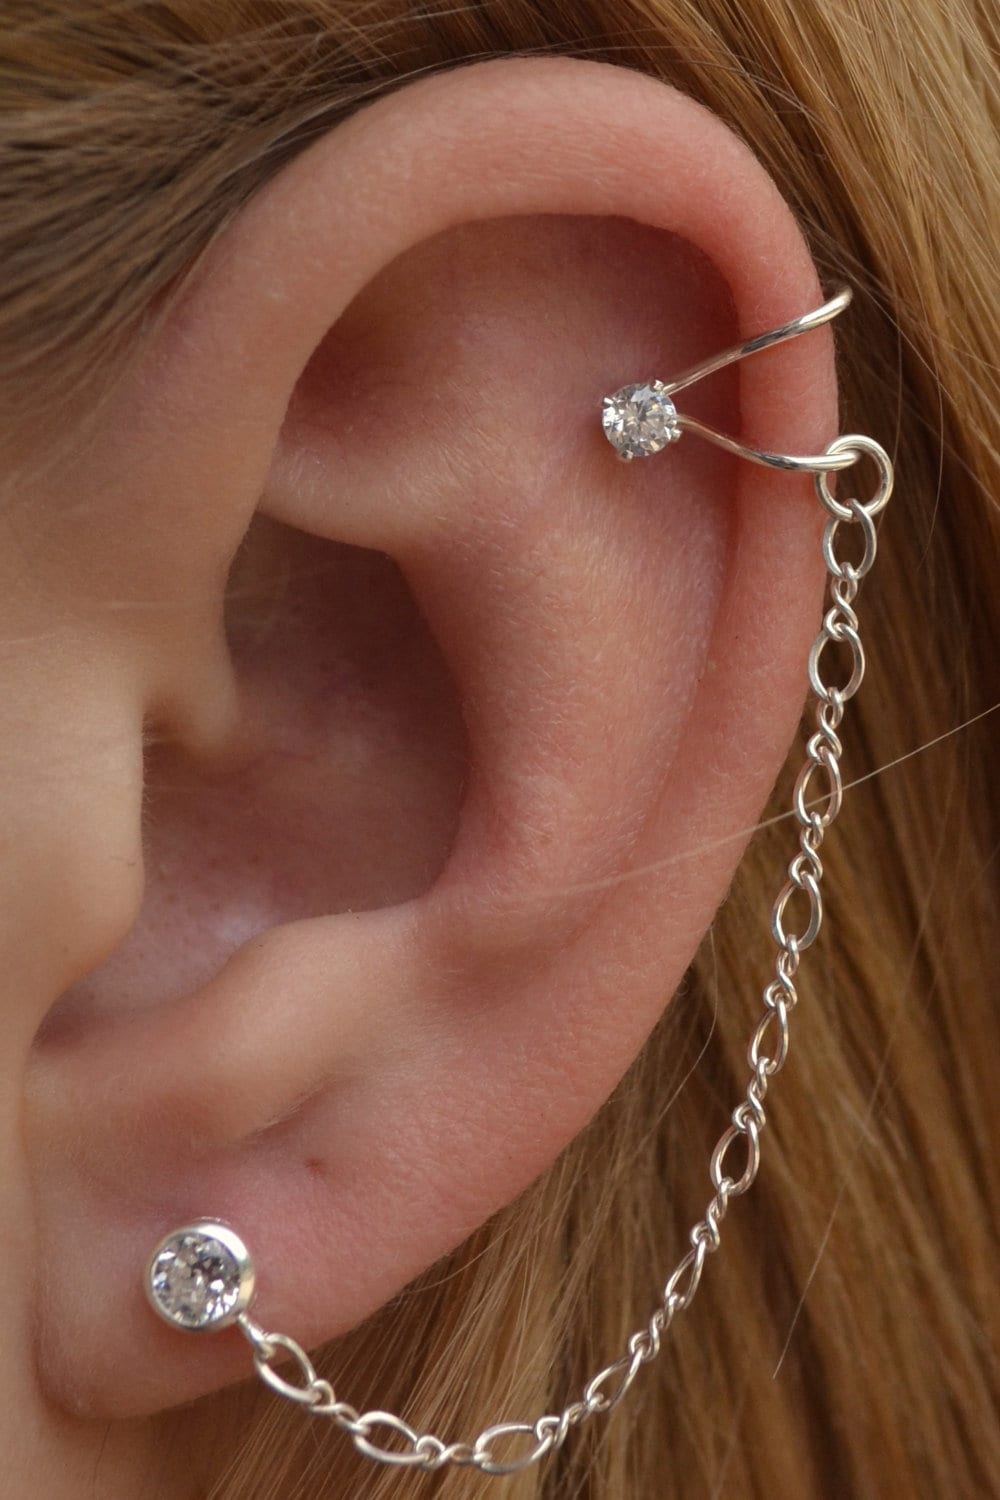 Triple Chain Helix Cartilage Earring Sterling Silver and Rose Gold   Inspired Handmade Jewellery